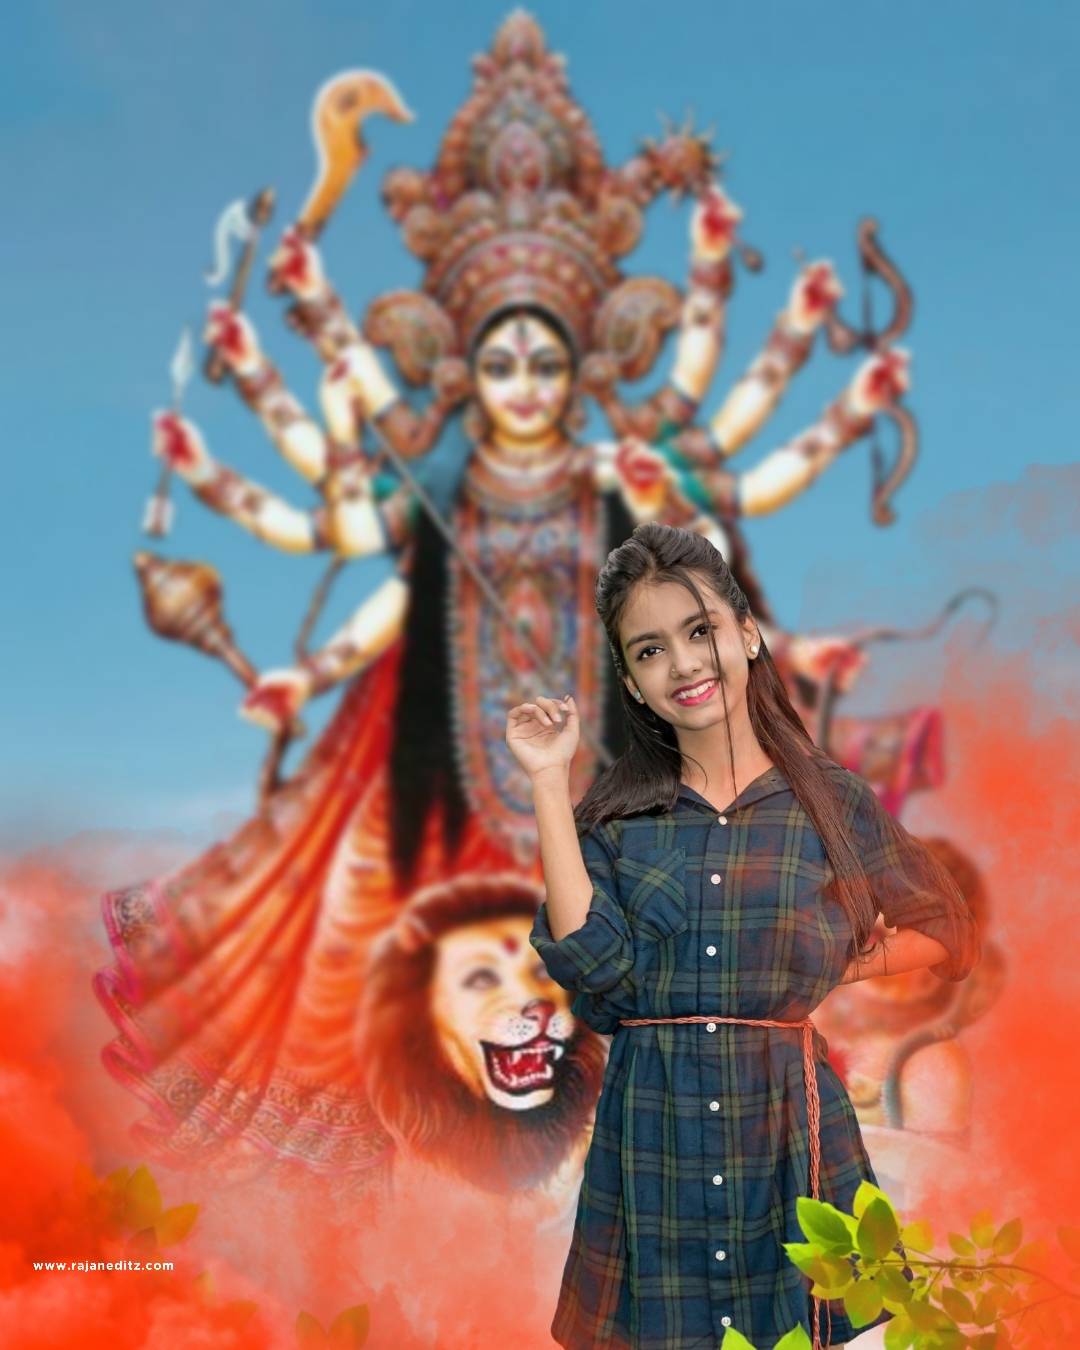 Little girl editing background download__ma durga editimng background __Durga Puja editing background